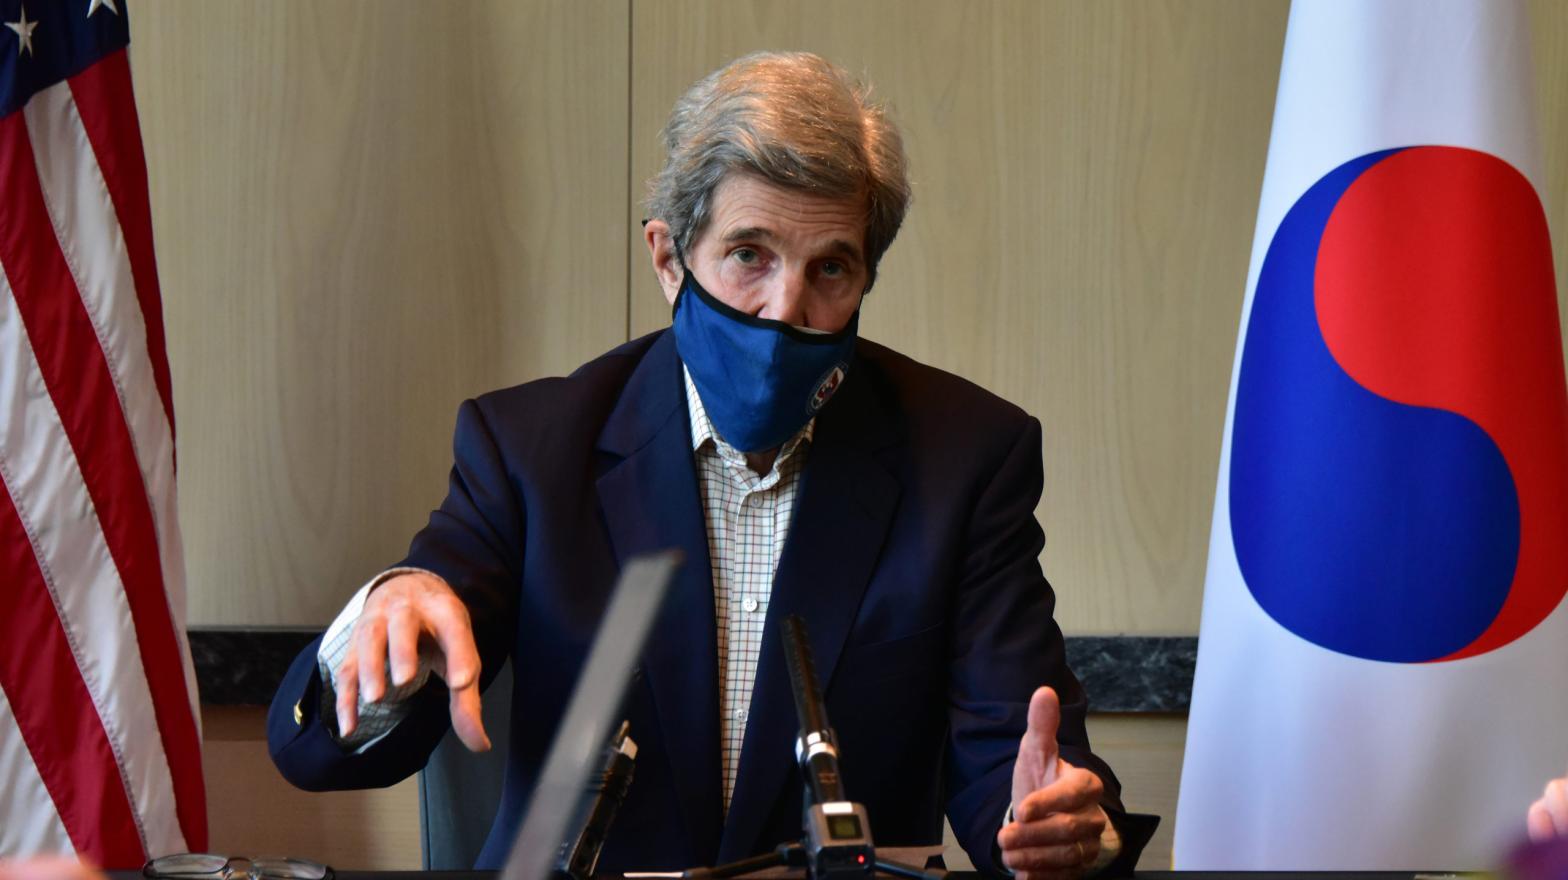 Special Presidential Envoy for Climate John Kerry speaks during a press conference on April 18, 2021 in Seoul, South Korea after two days of climate talks in Shanghai, China. (Photo: U.S. Embassy Seoul, Getty Images)